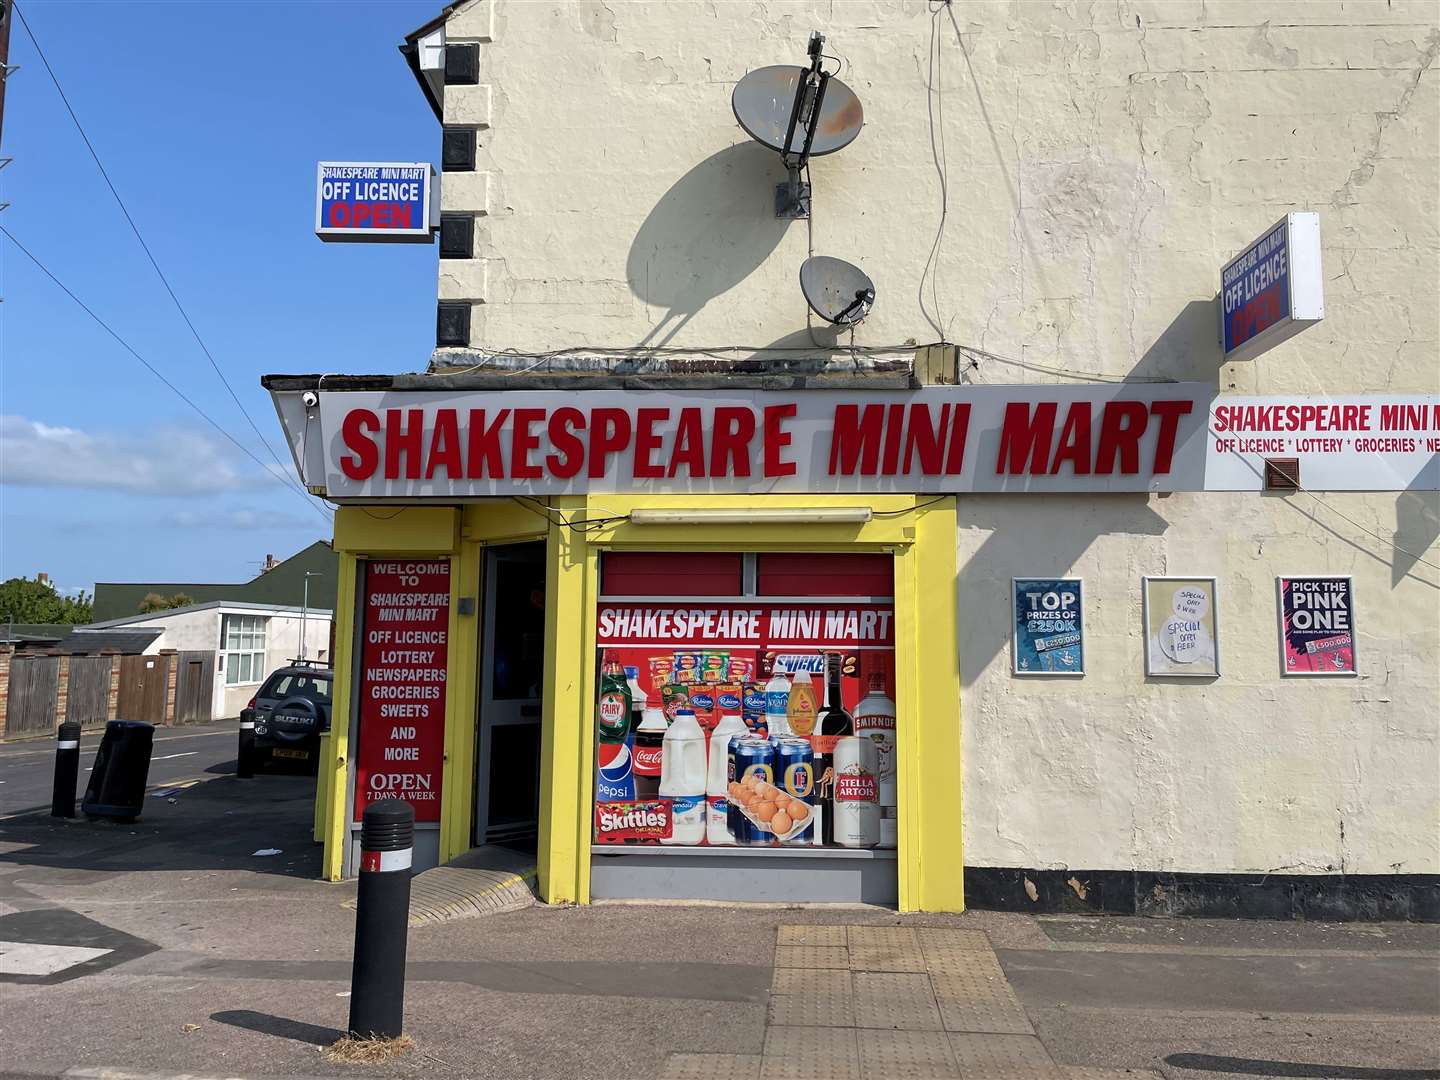 The alleged assault is said to have happened outside Shakespeare Mini Mart